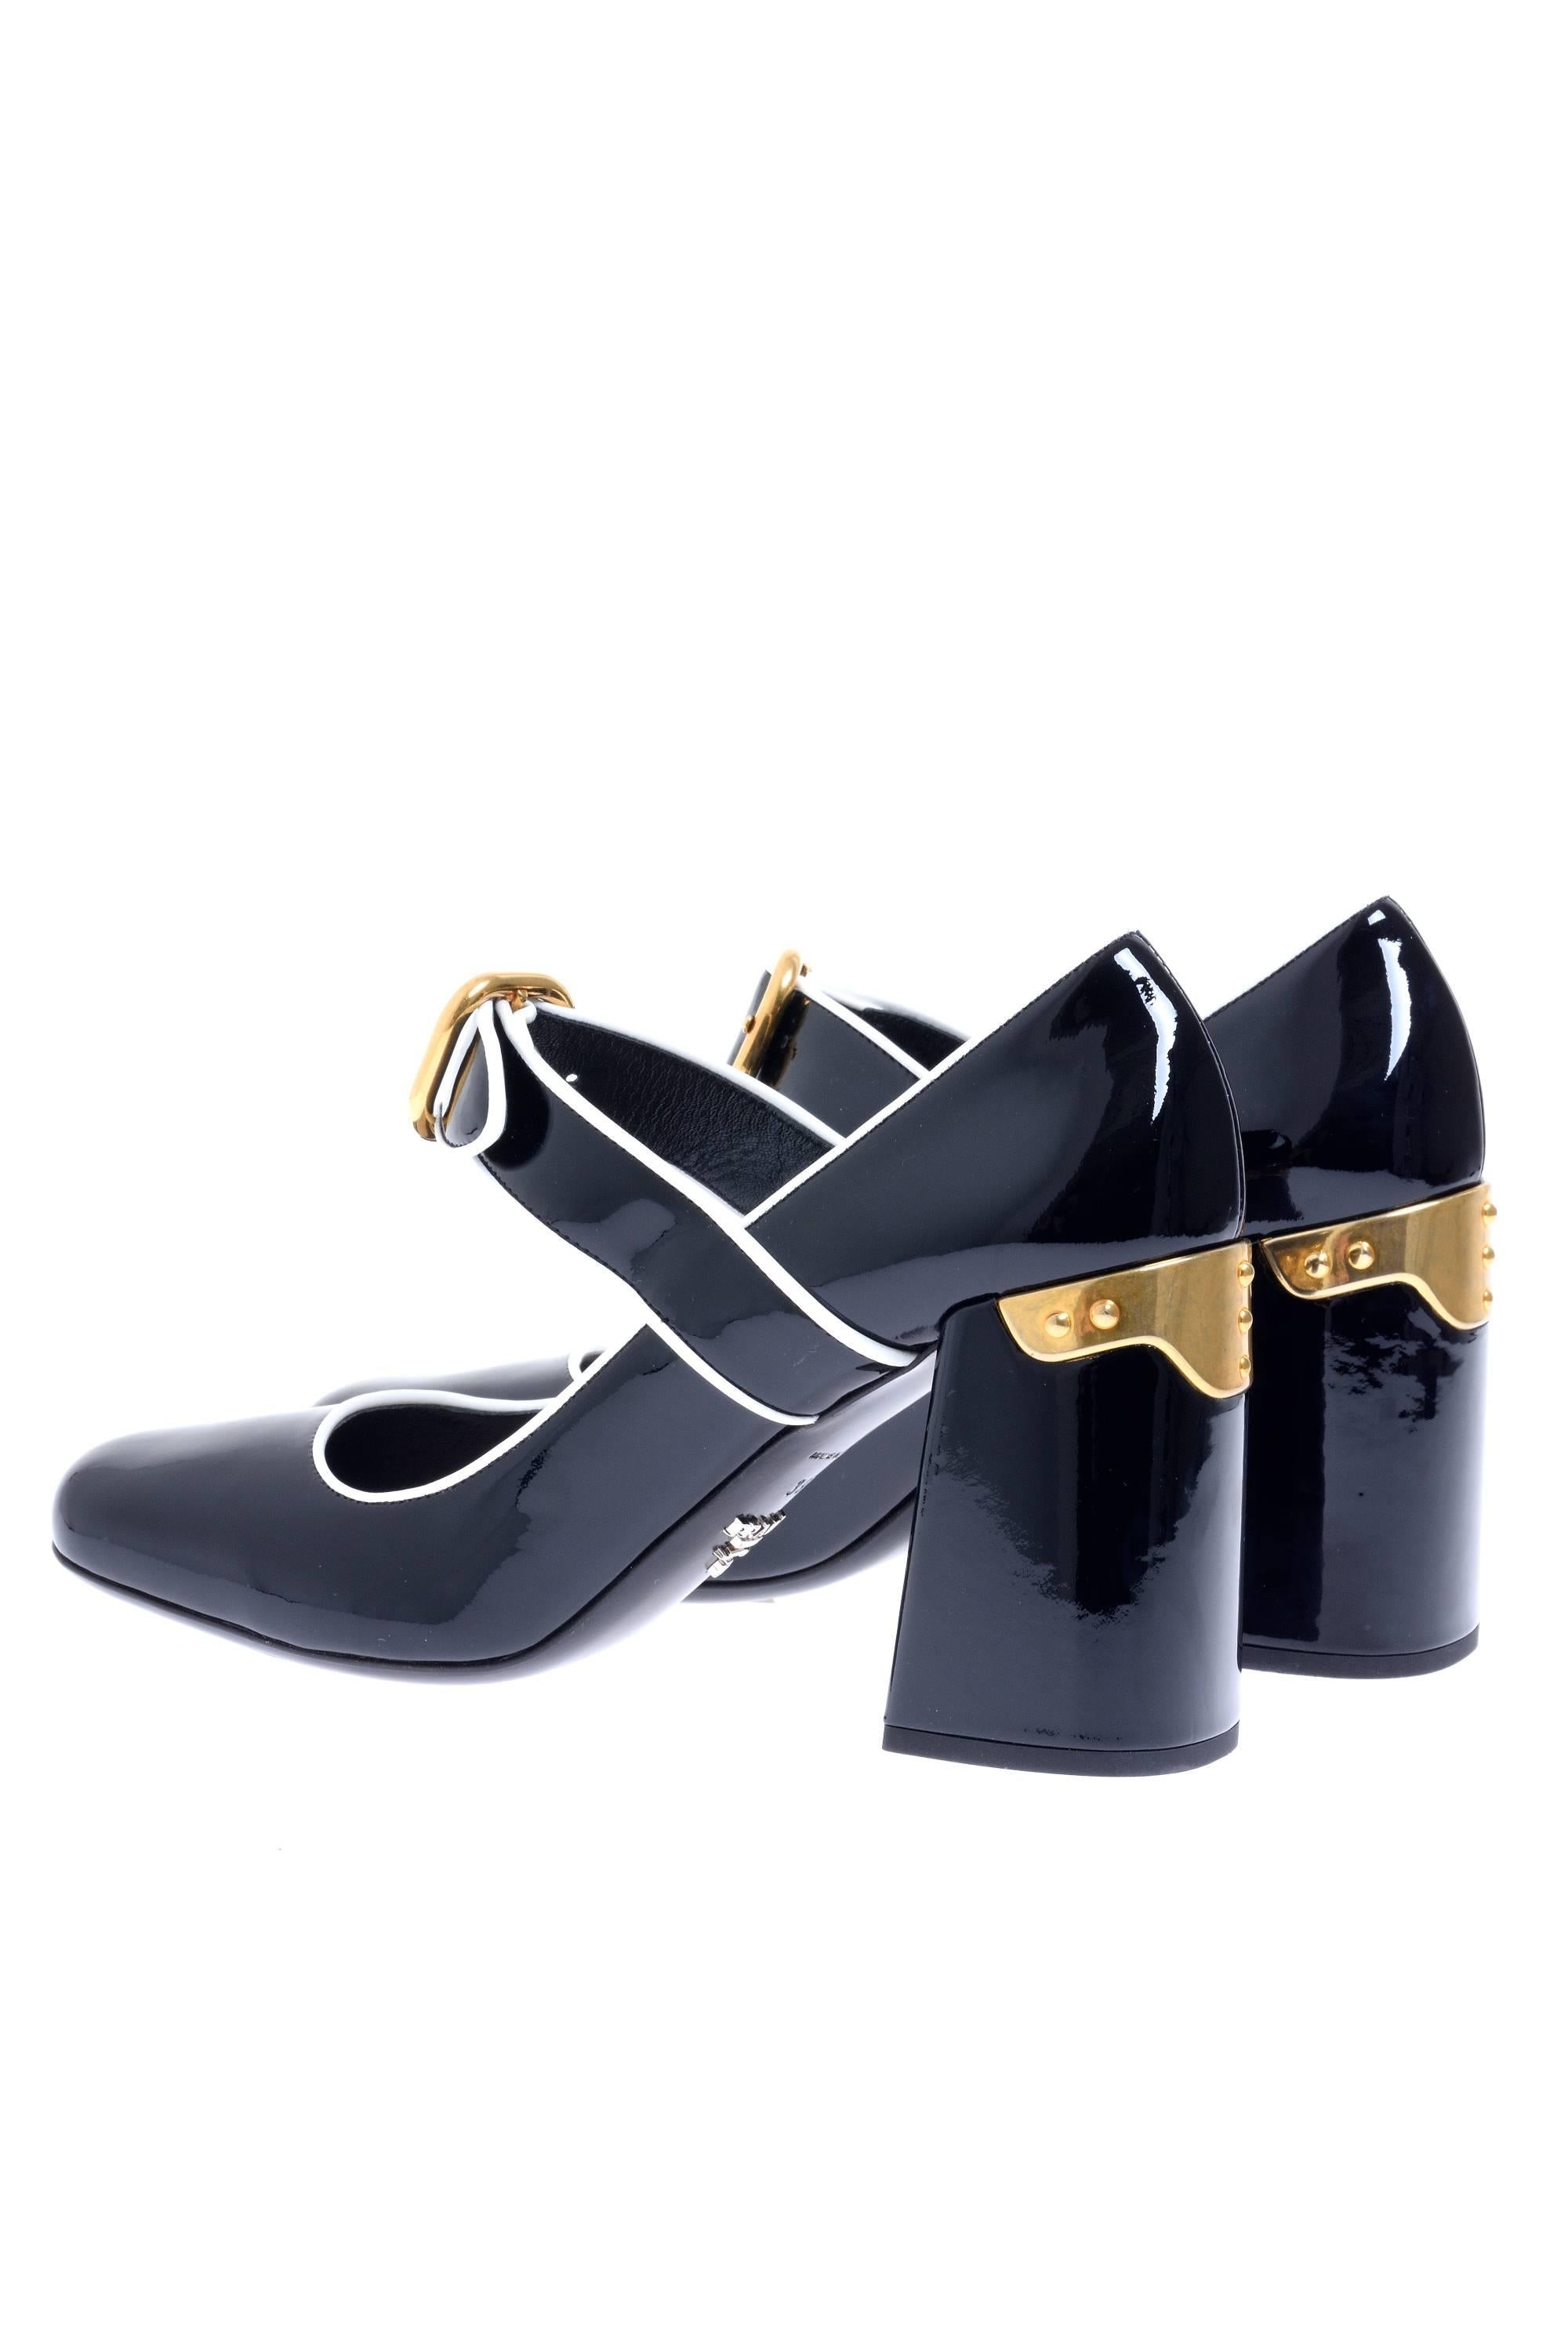 PRADA black glossy patent leather is set off by white piping on this chic mary jane pump, while the square toe,  and chunky heel keep the look ultra-contemporary, a decoration in metal gold in the hell and adjustable strap with buckle